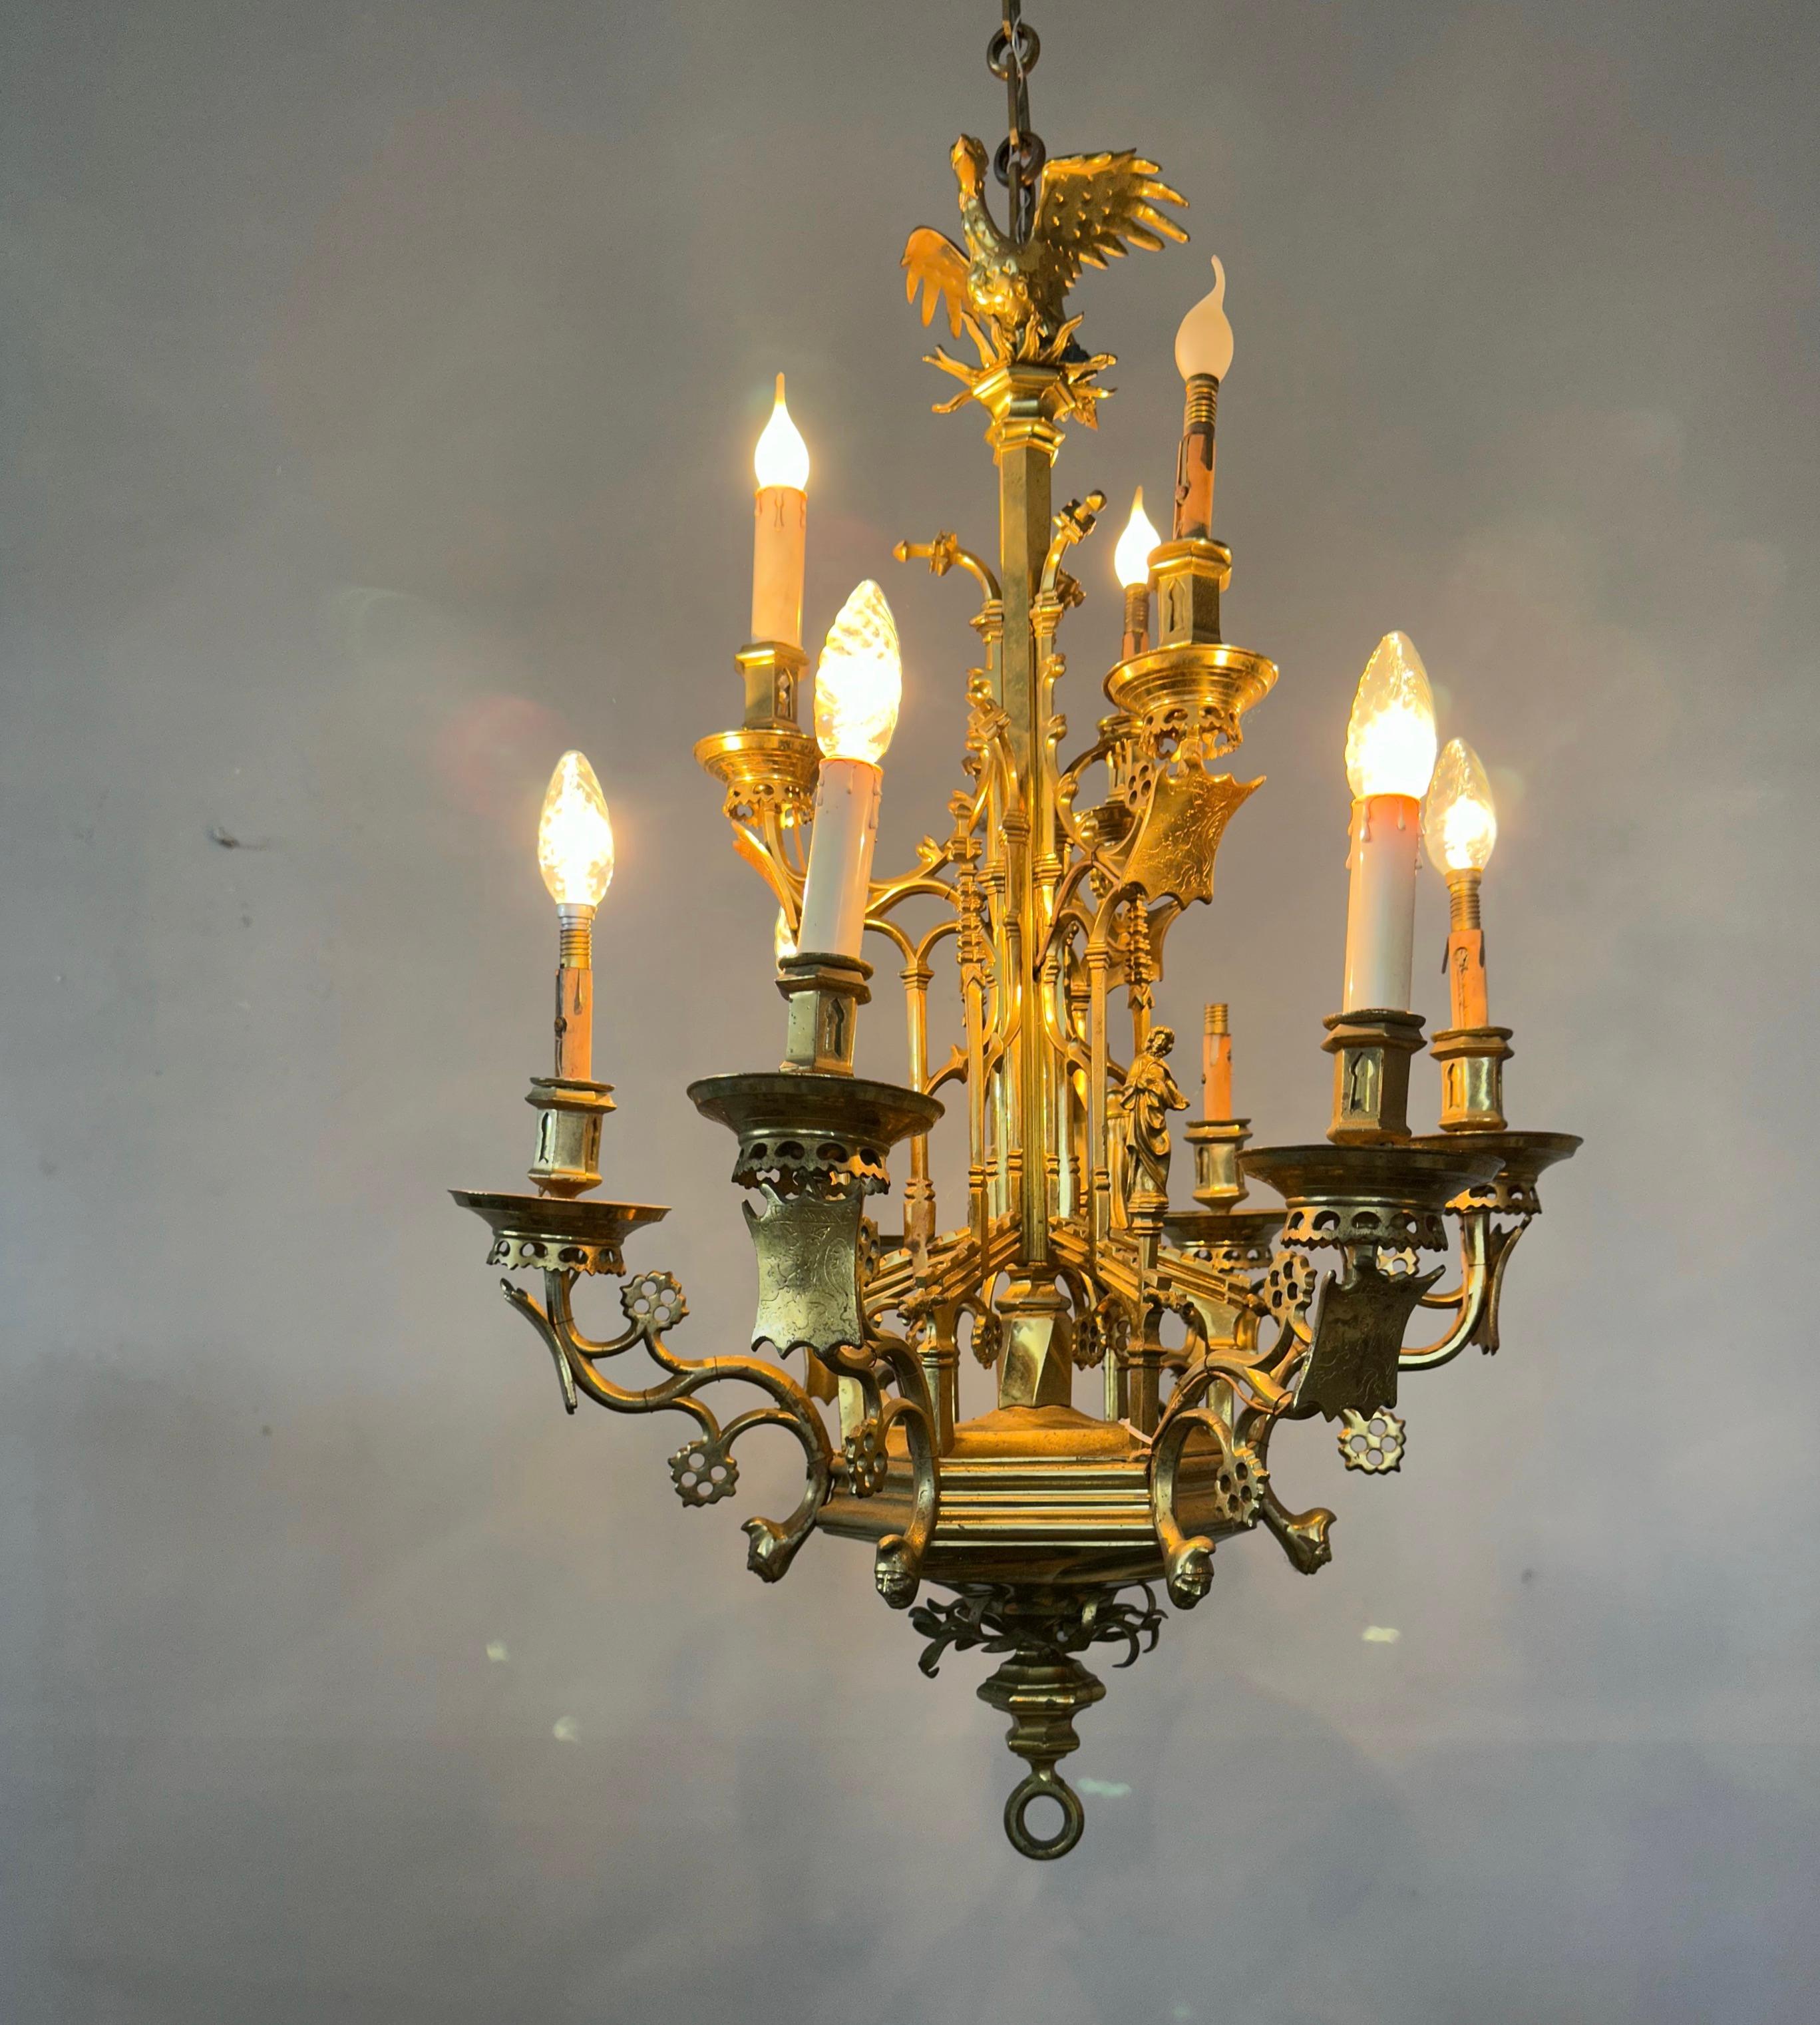 Awesome Antique Bronze Gothic Art Nine Light Chandelier with Phoenix Sculpture For Sale 5